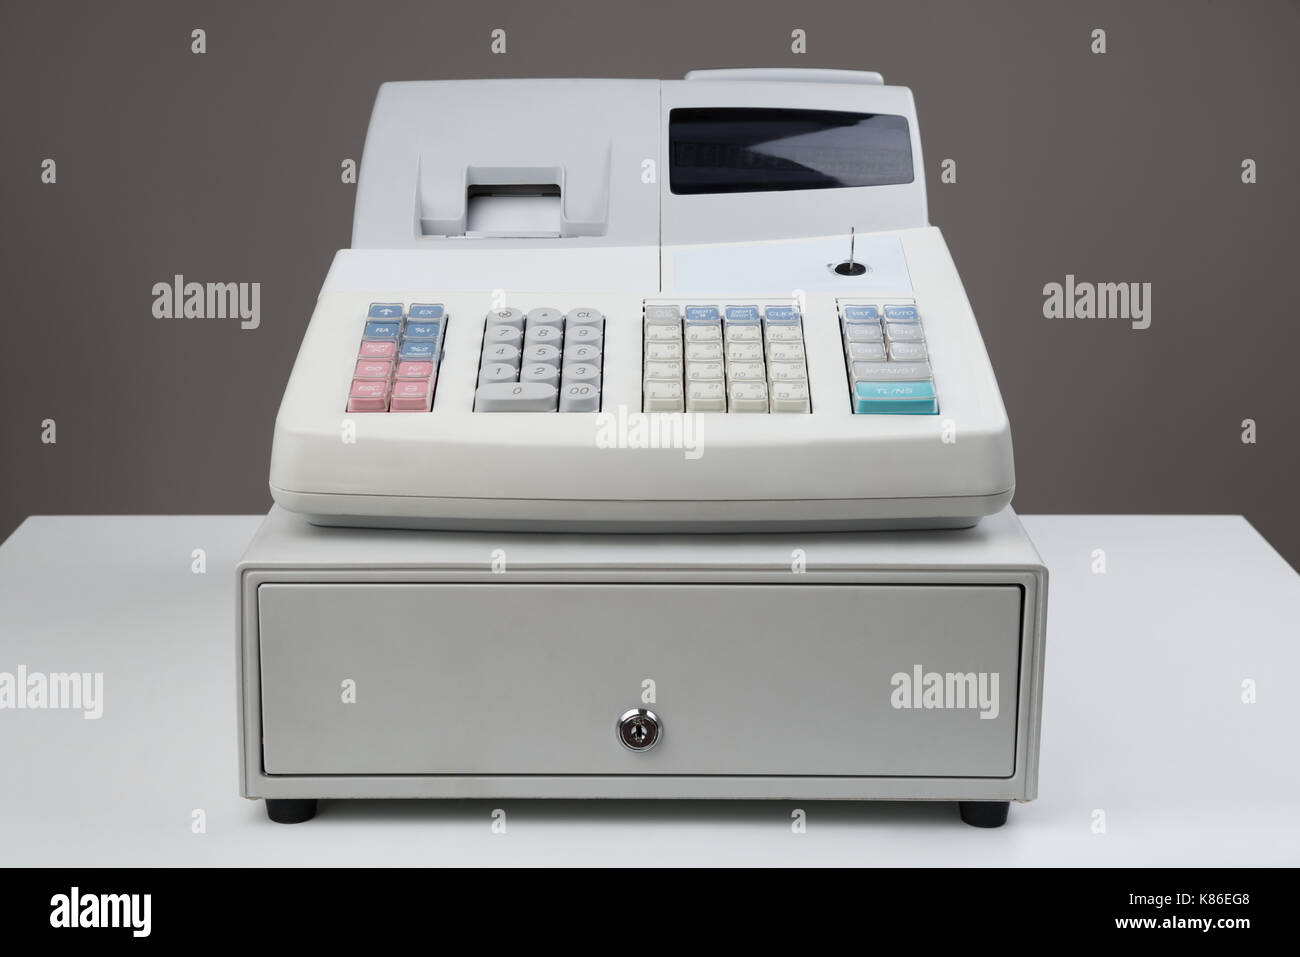 Close-up Of Electronic Cash Register Moneybox On Counter Stock Photo